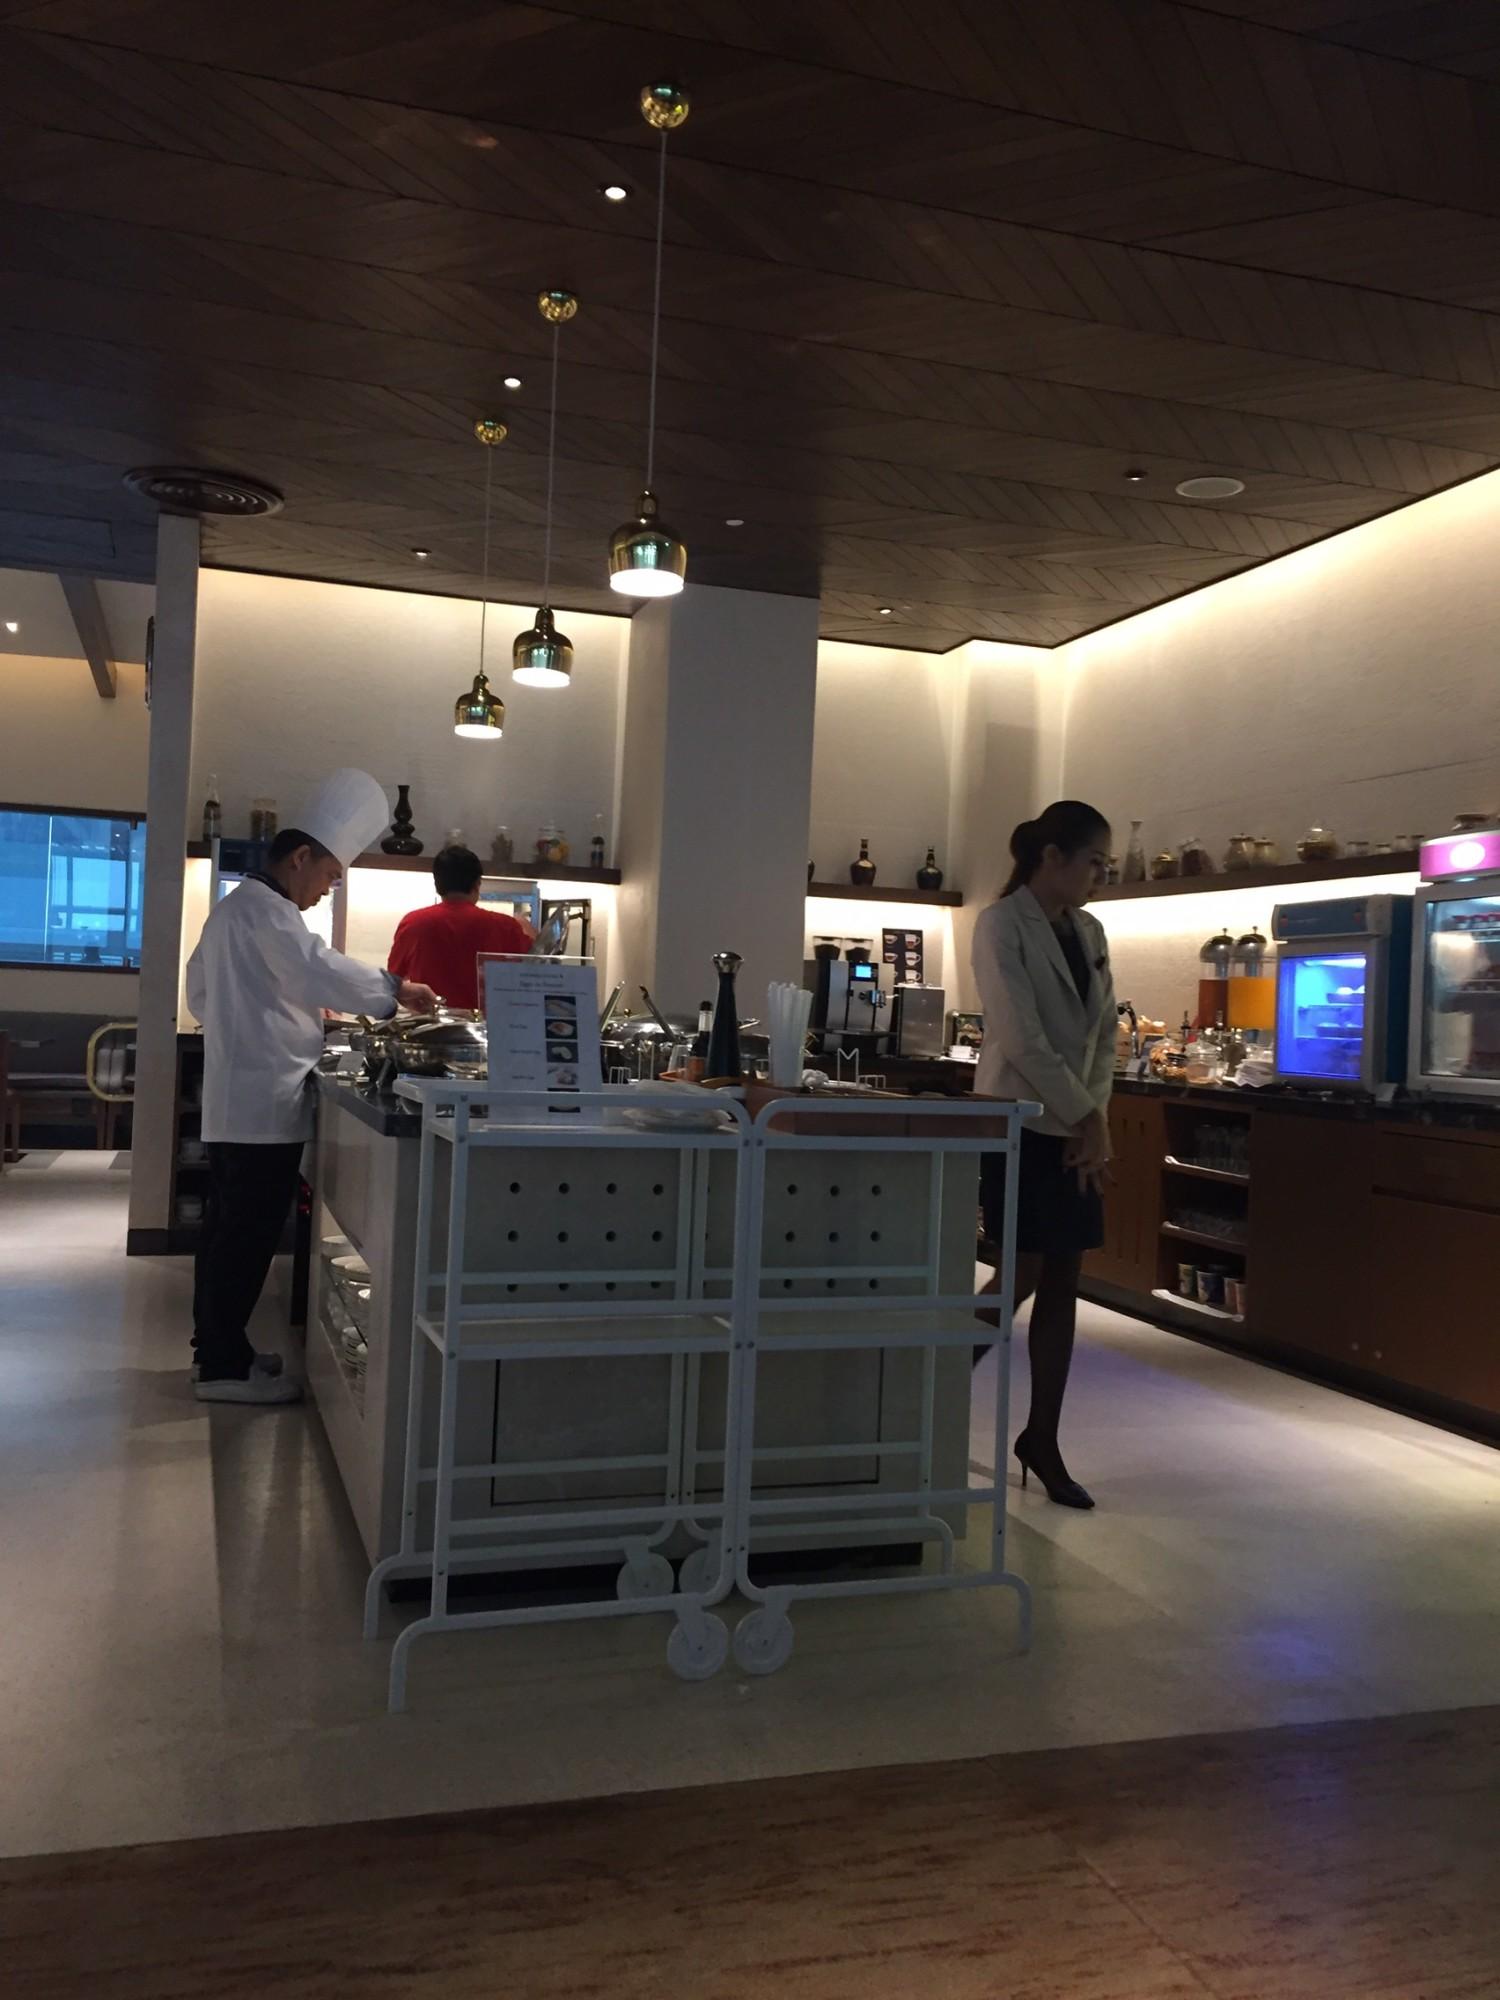 Singapore Airlines SilverKris Business Class Lounge  image 1 of 16